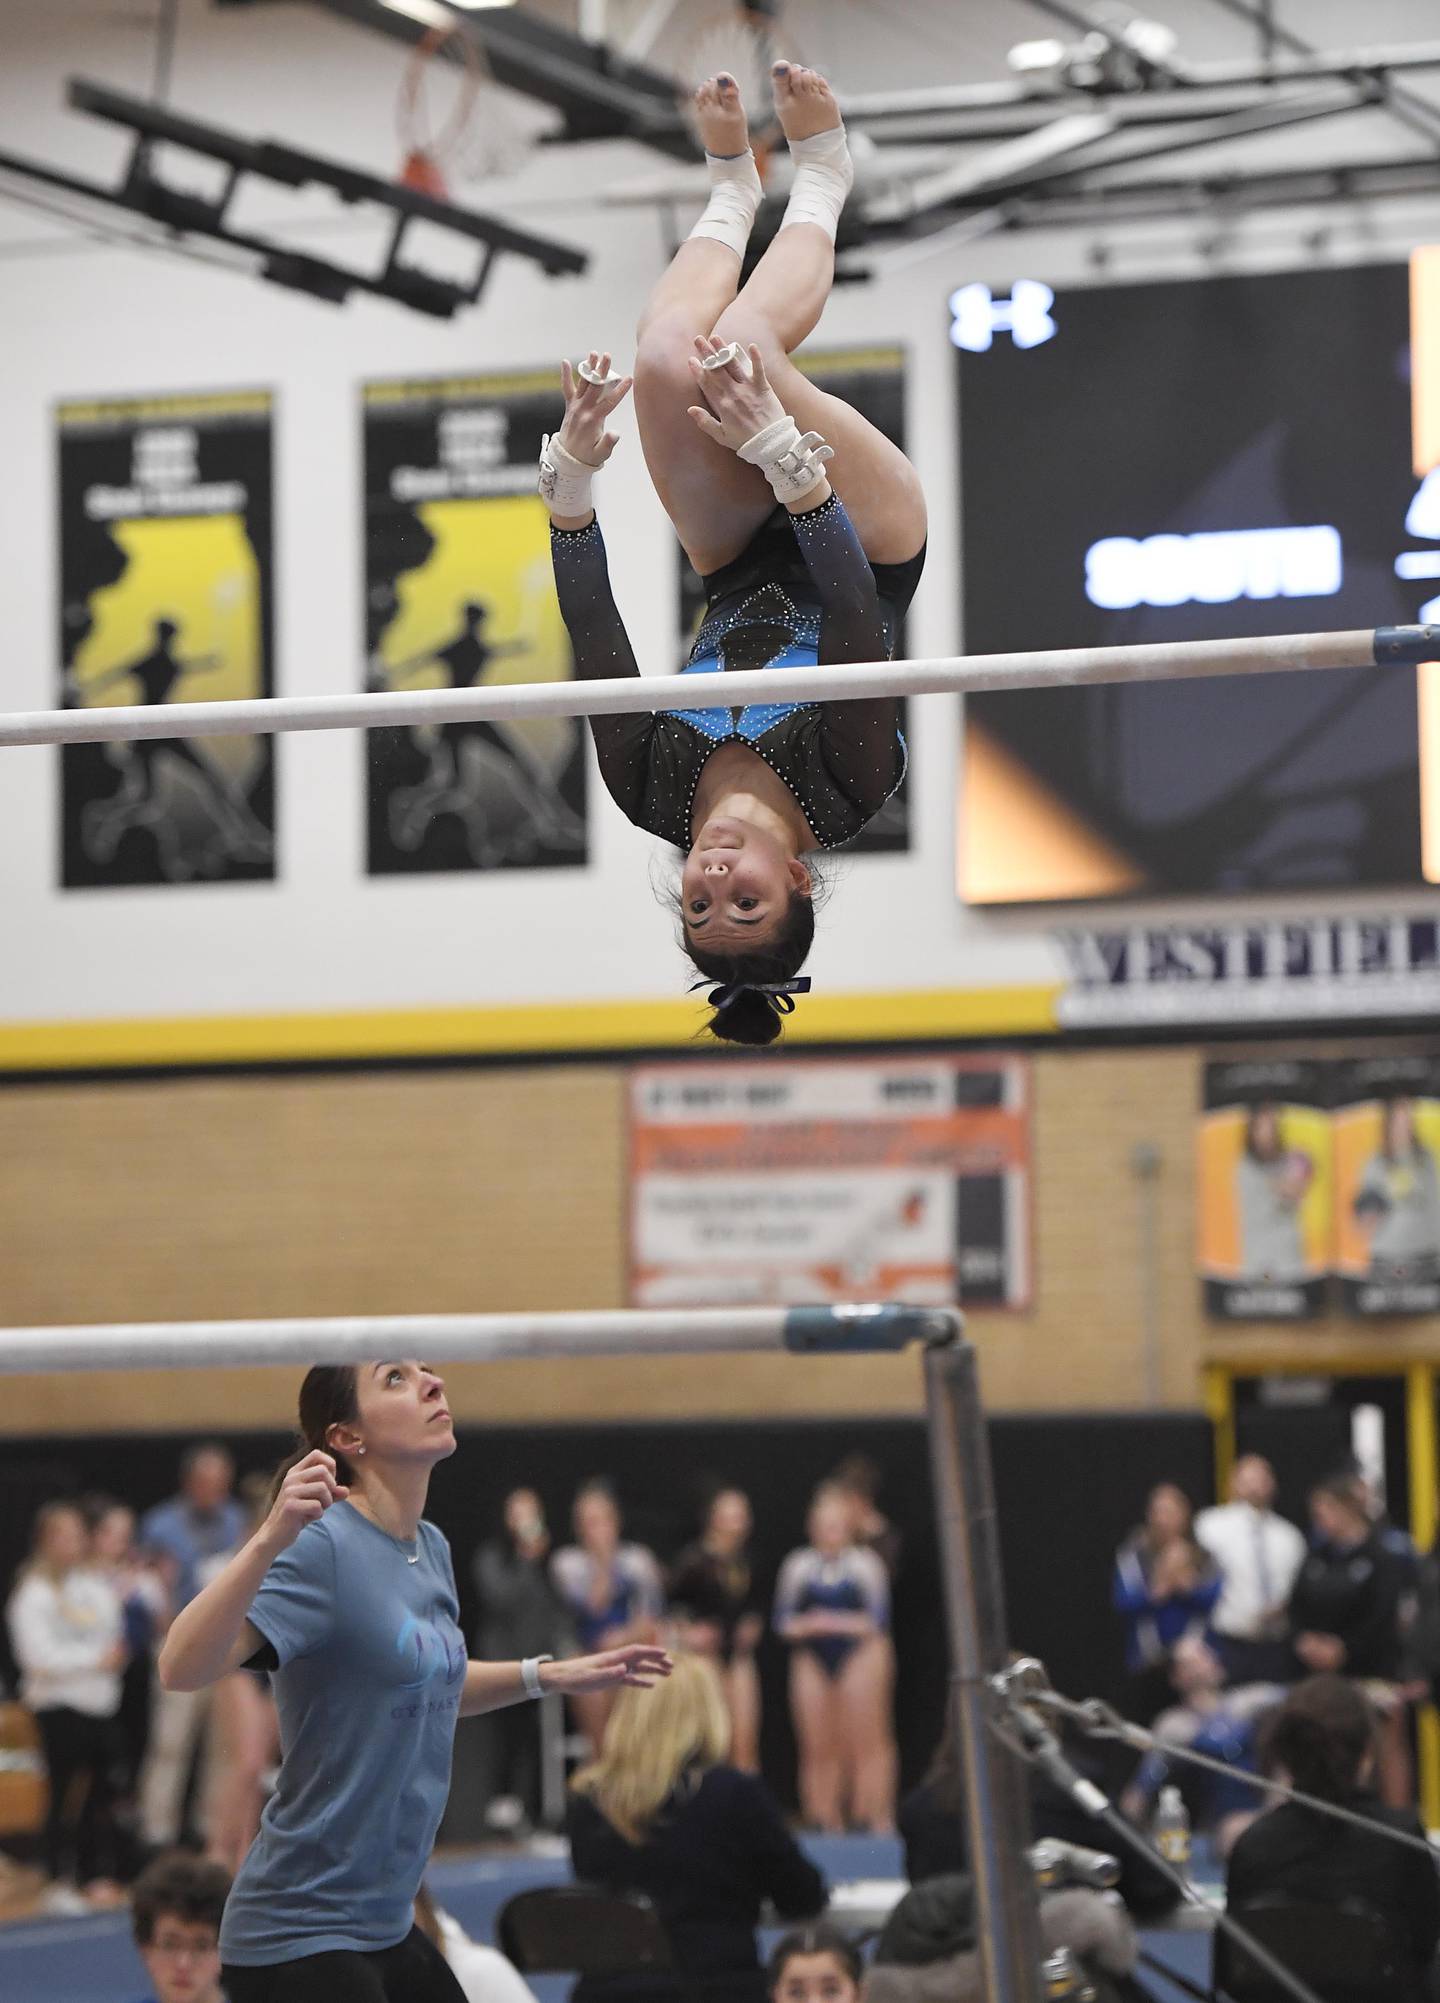 Genevieve Herion of Downers Grove South High School on the uneven parallel bars at the Hinsdale South girls gymnastics sectional meet in Darien on Tuesday, February 7, 2023.